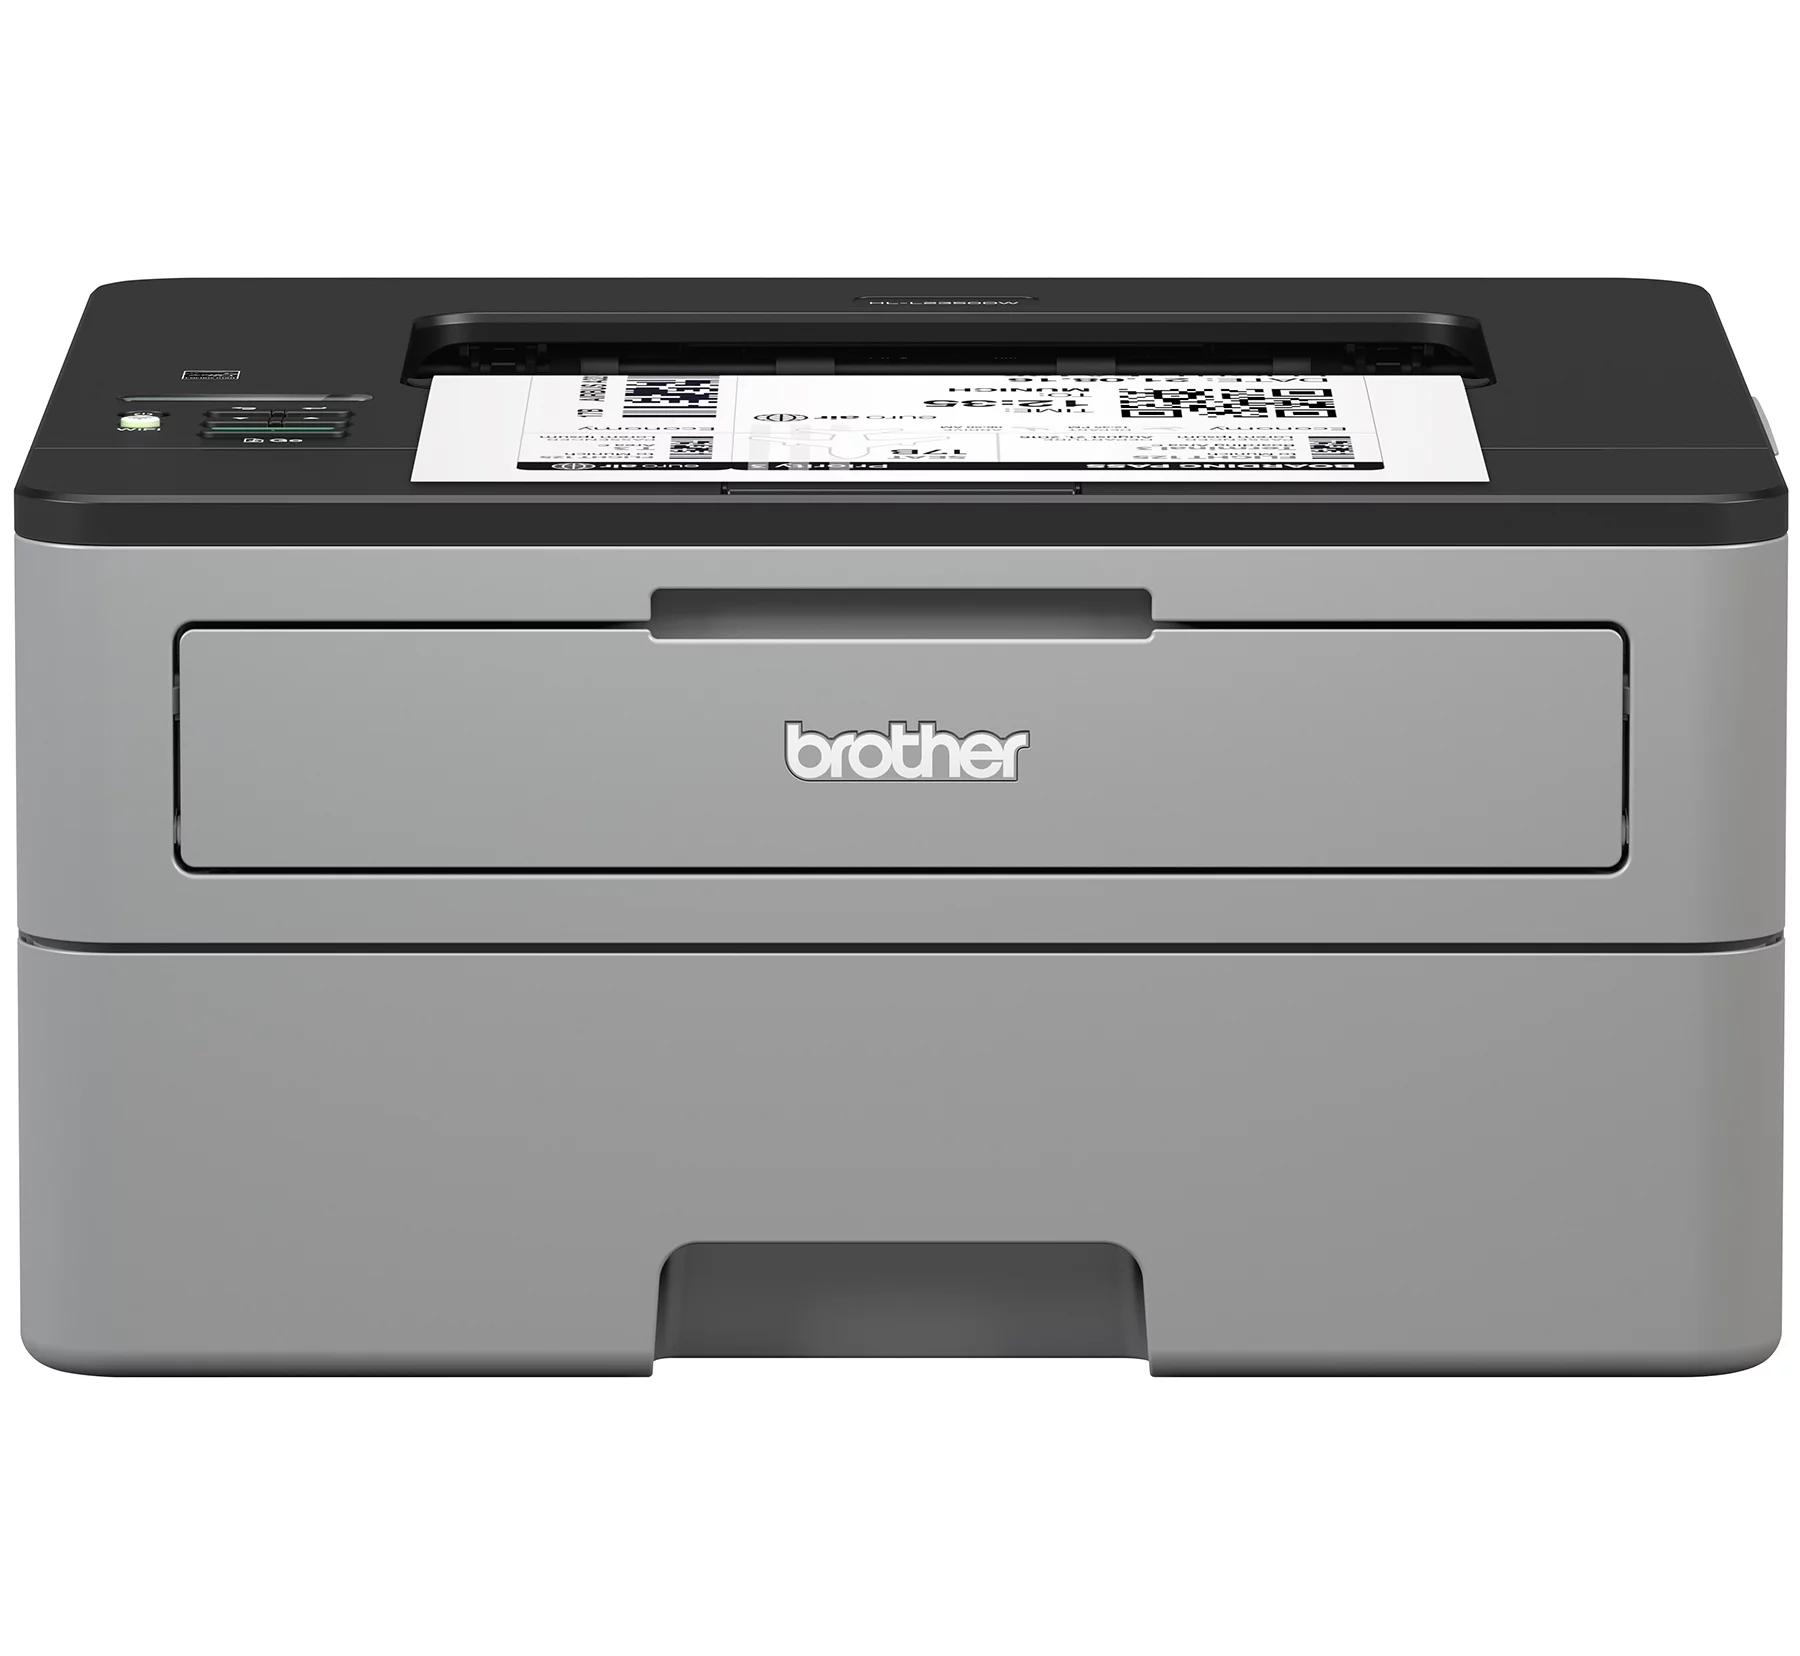 Brother HL-L2350DW Monochrome Compact Laser Printer with Wireless and Duplex Printing